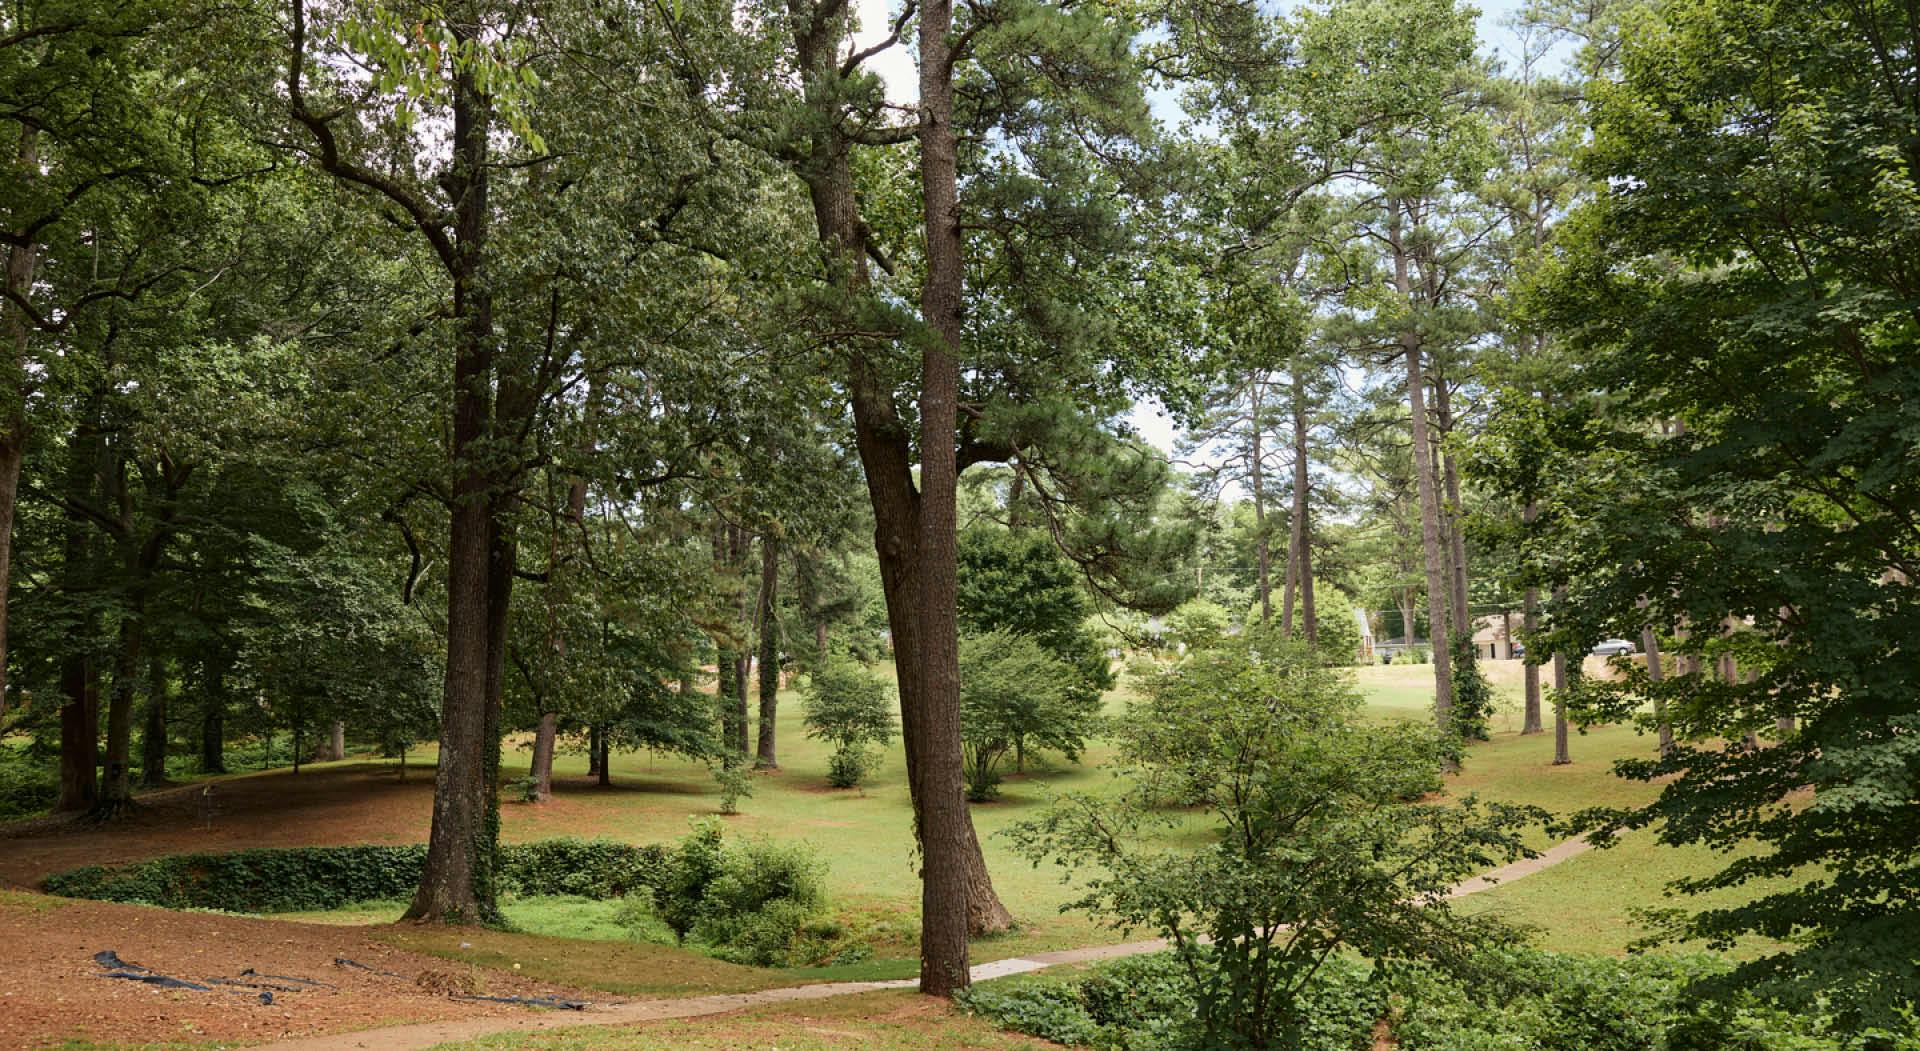 Rolling grassy hills and tall trees with a paved path in Perkerson Park. (Photo Credit: Erin Sintos)